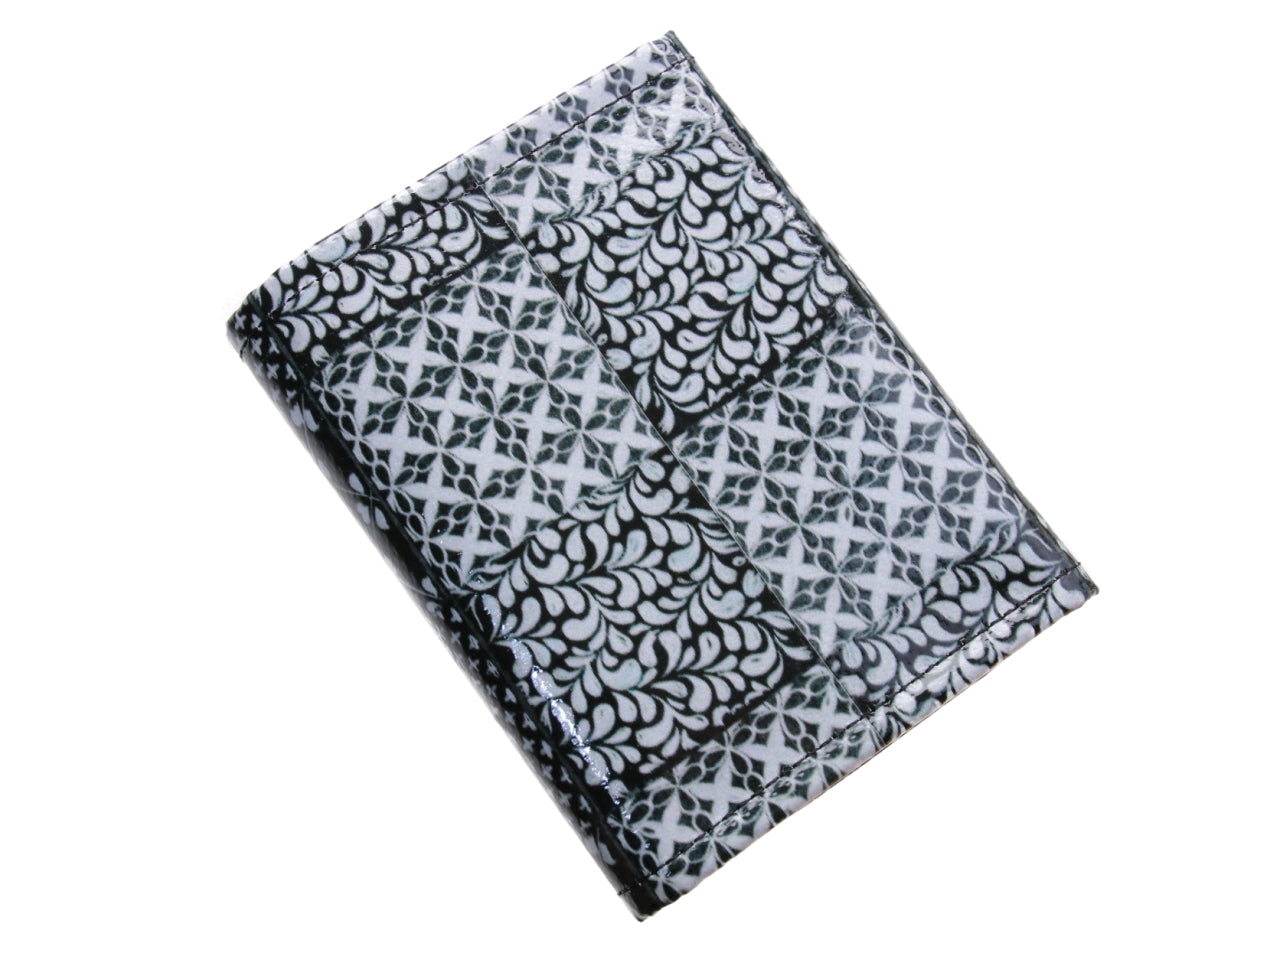 BLACK AND WHITE WOMEN'S WALLET "EMBROIDERY STYLE". MODEL TREK MADE OF LORRY TARPAULIN. - Limited Edition Paul Meccanico